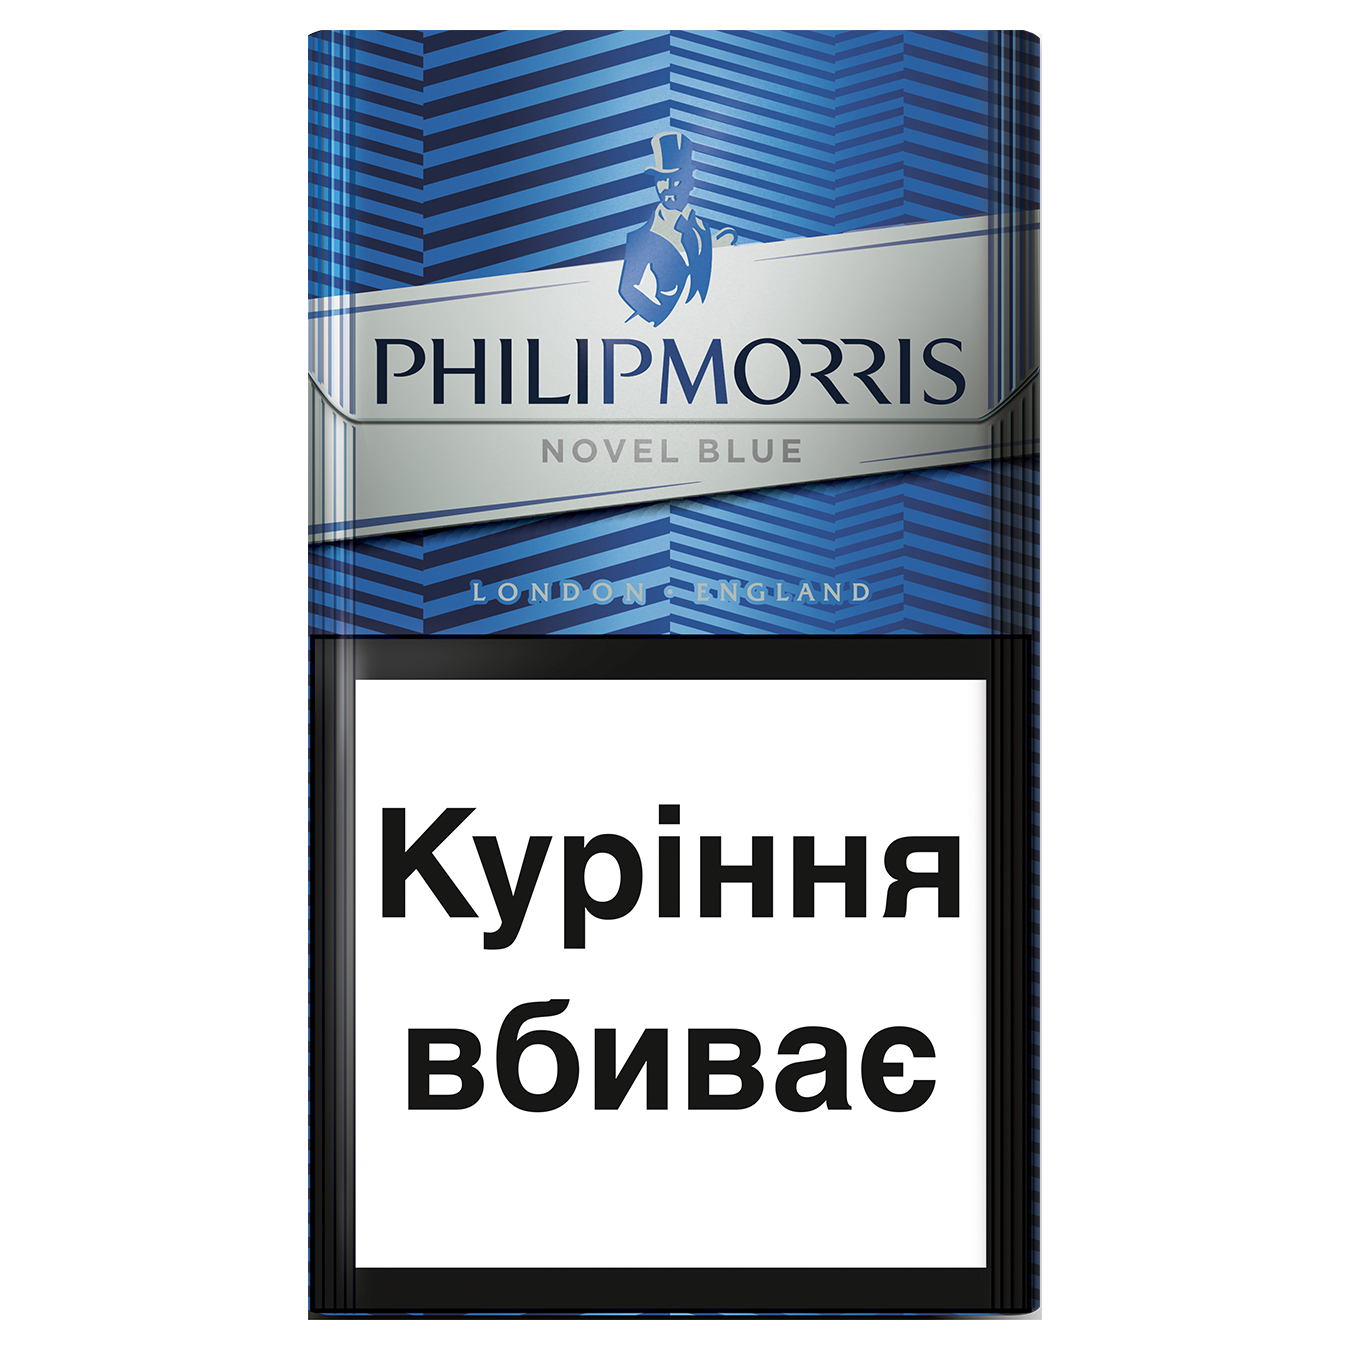 Cigarettes Philip Morris Novel Blue 20pcs (the price is indicated without excise tax)